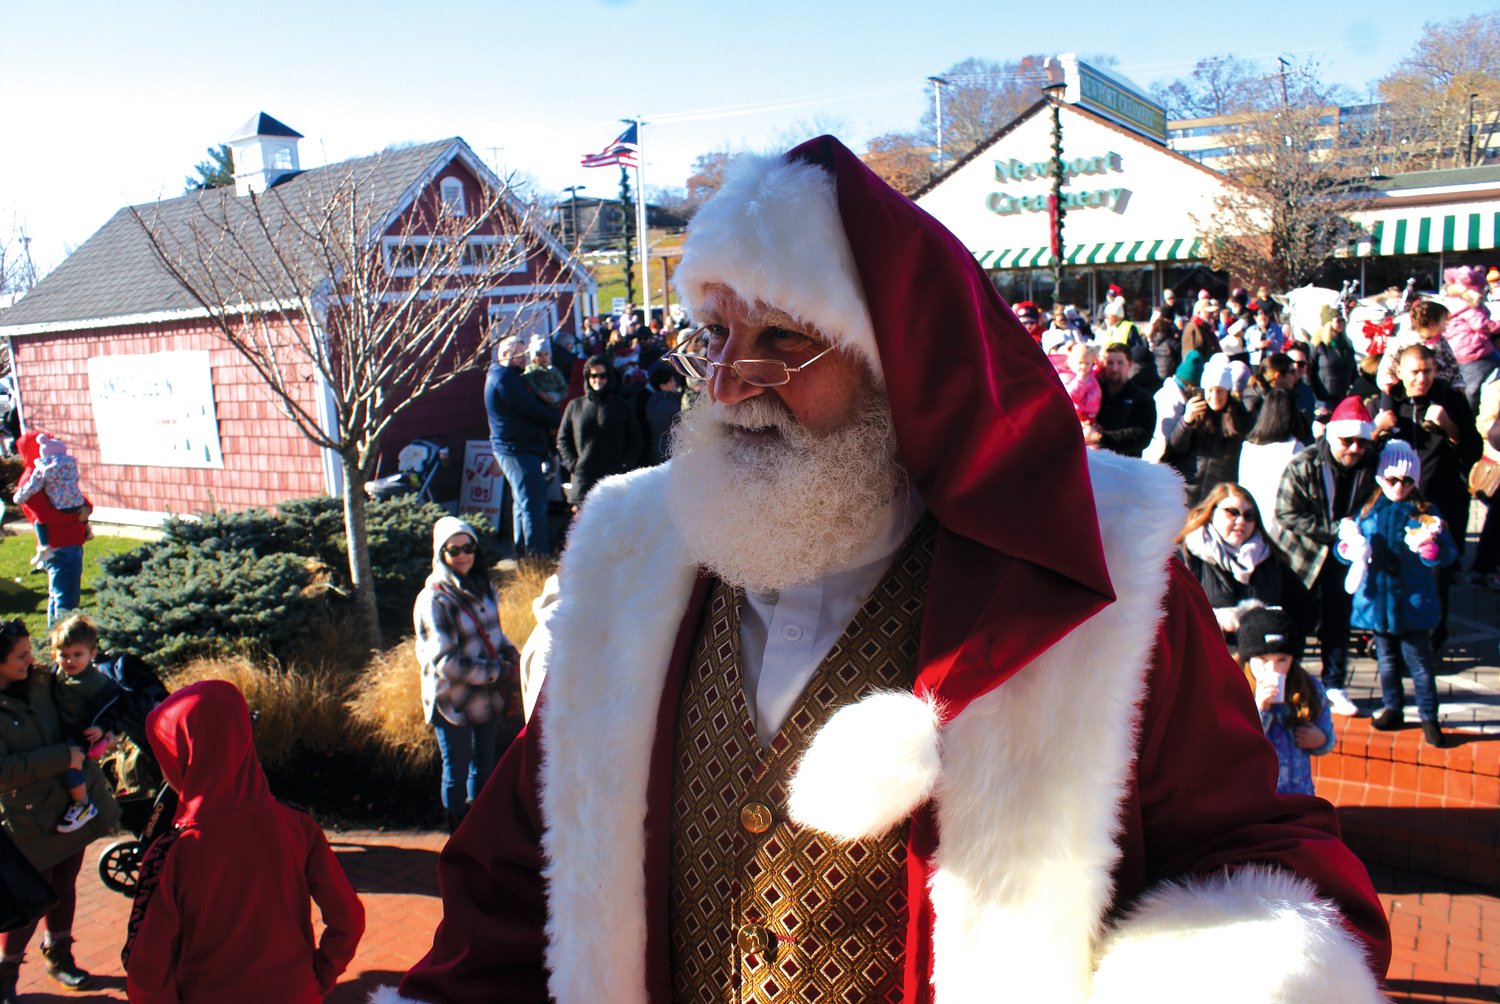 WE WANT TO SEE SANTA: A large crowd showed up at Garden City Center on Saturday for Santa’s grand entrance.